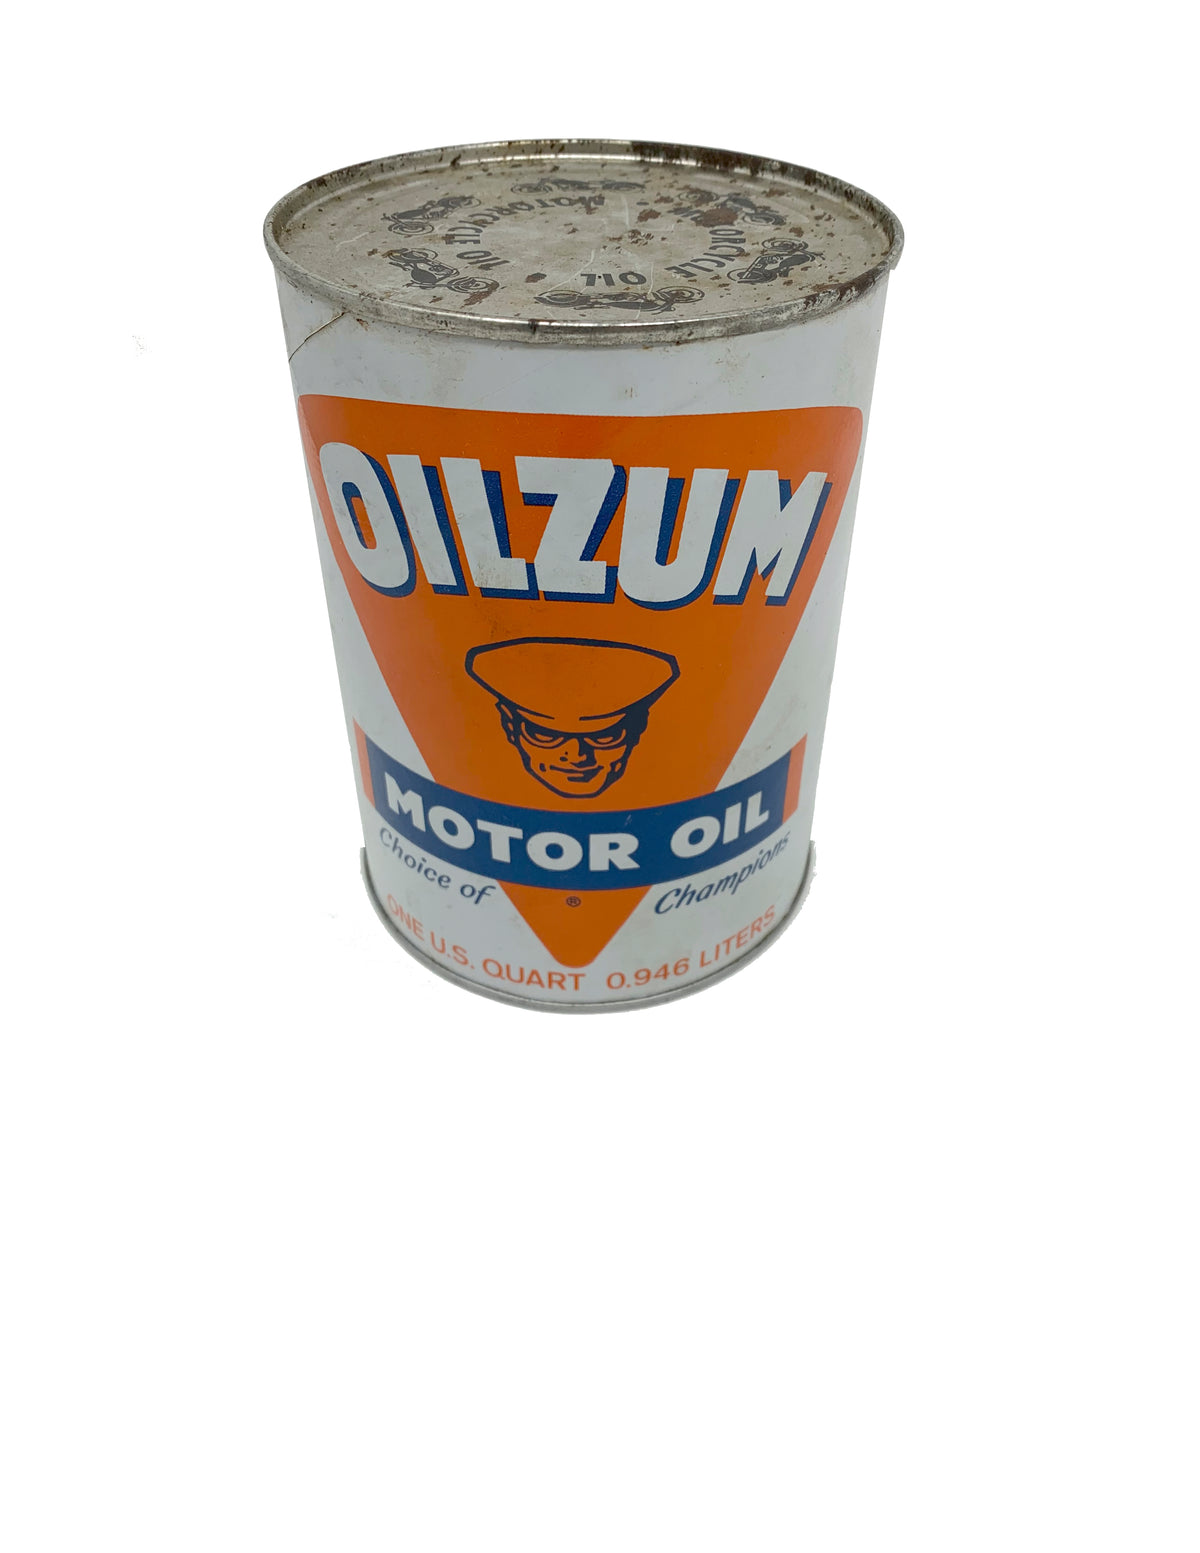 Vintage OILZUM Champion Motor Oil Fully intact 1 Qt Tin Can